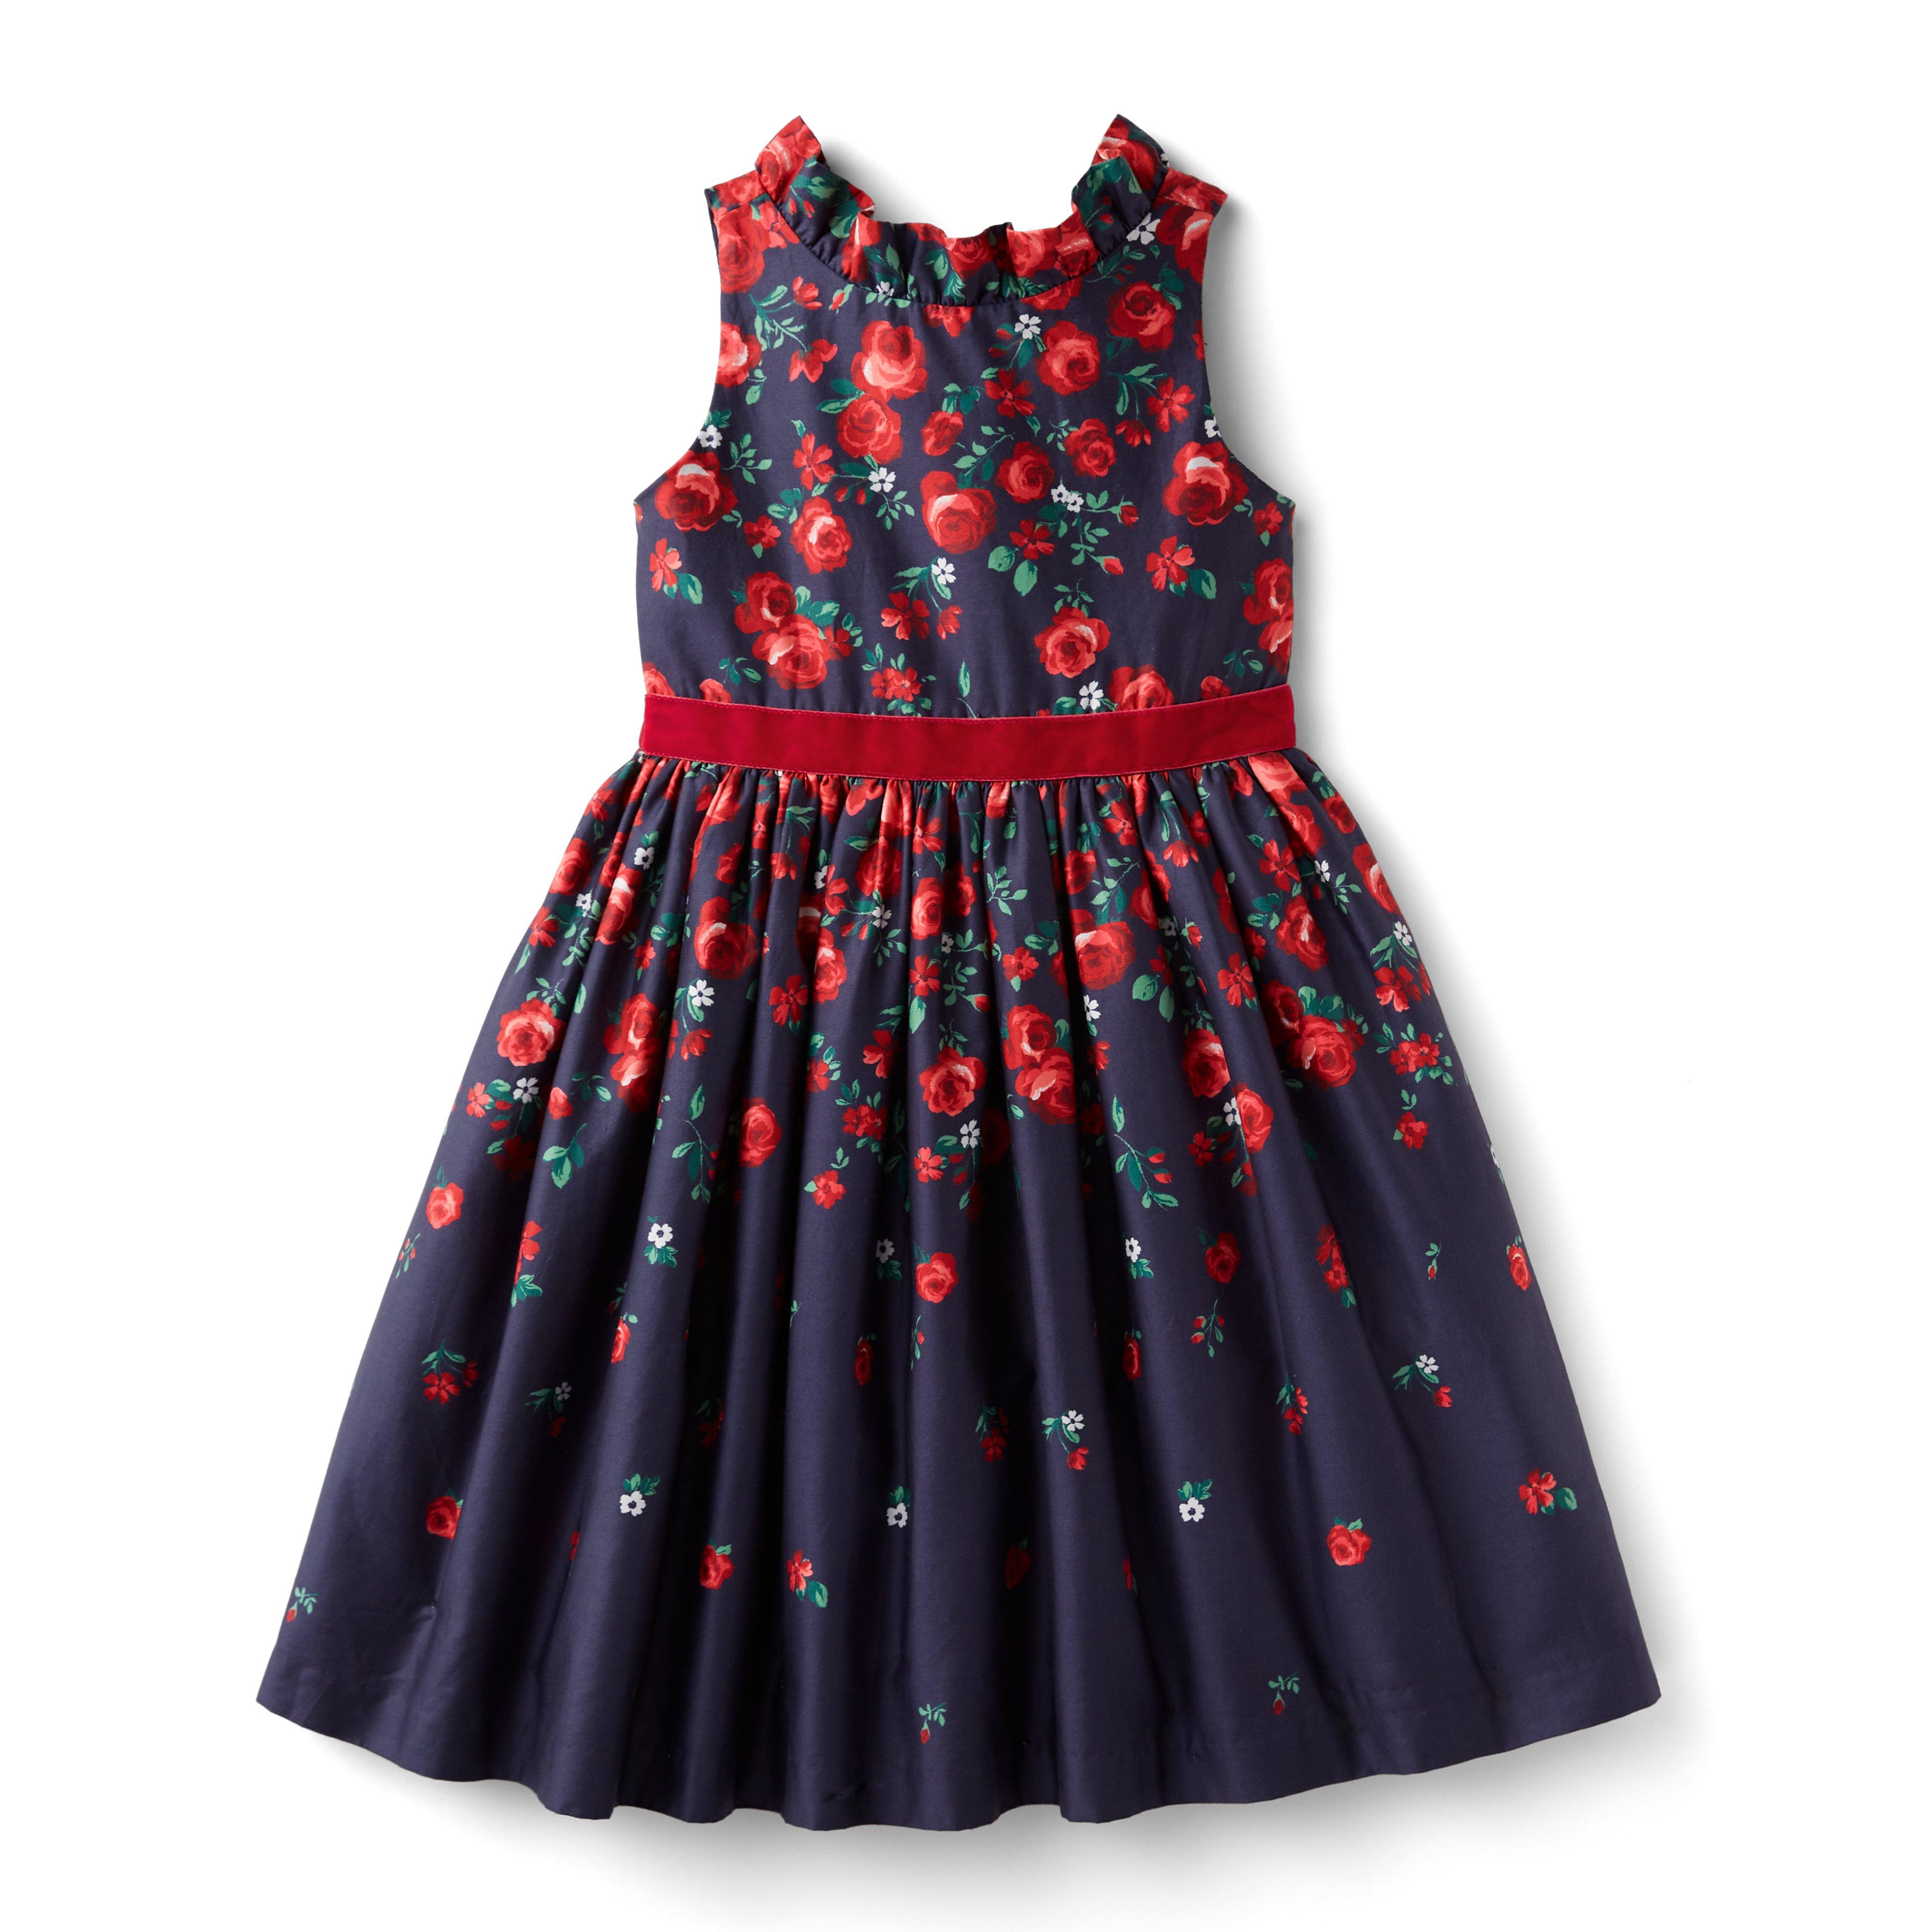 American Girl® x Janie And Jack Wrapped in Roses Dress For Dolls image number 2